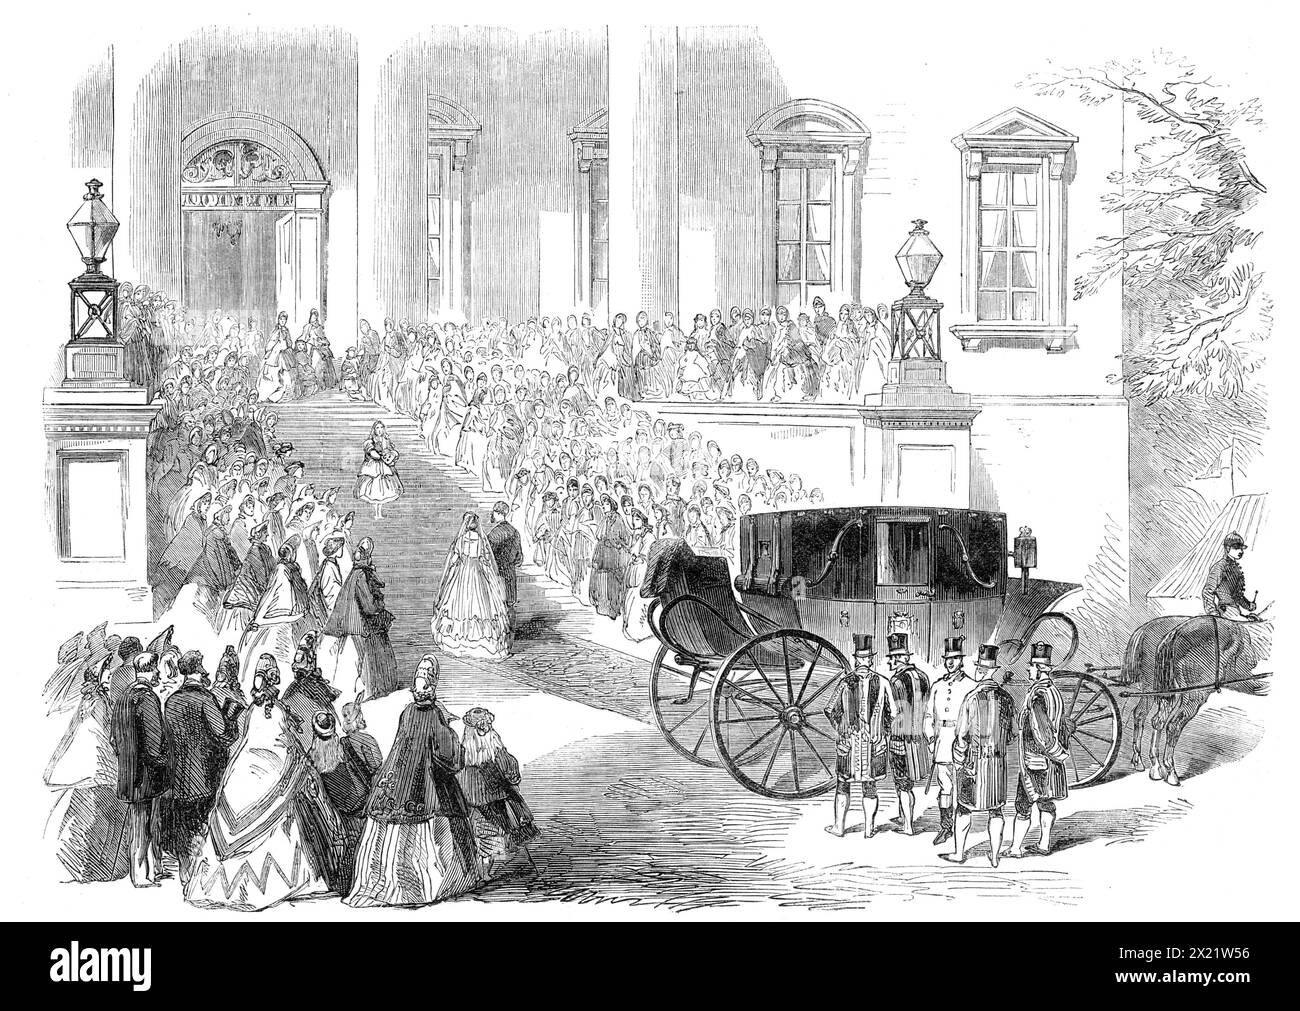 Marriage of the Count de Paris with the Princess Isabelle d'Orleans: the return to Claremont, 1864. '...Louis Philippe Albert d'Orleans, the Count de Paris, son of the Duke of Orleans and grandson of King Louis Philippe, was married to his first cousin, Princess Maria Isabella Francesca d'Assisi, daughter of the Duke de Montpensier, and niece, by her mother's side, to the Queen of Spain...After the ceremony...the young Count and Countess de Paris entered their carriage to return to Claremont, amidst all manner of festive demonstrations - cheering, and firing of cannon, and ringing of bells - i Stock Photo